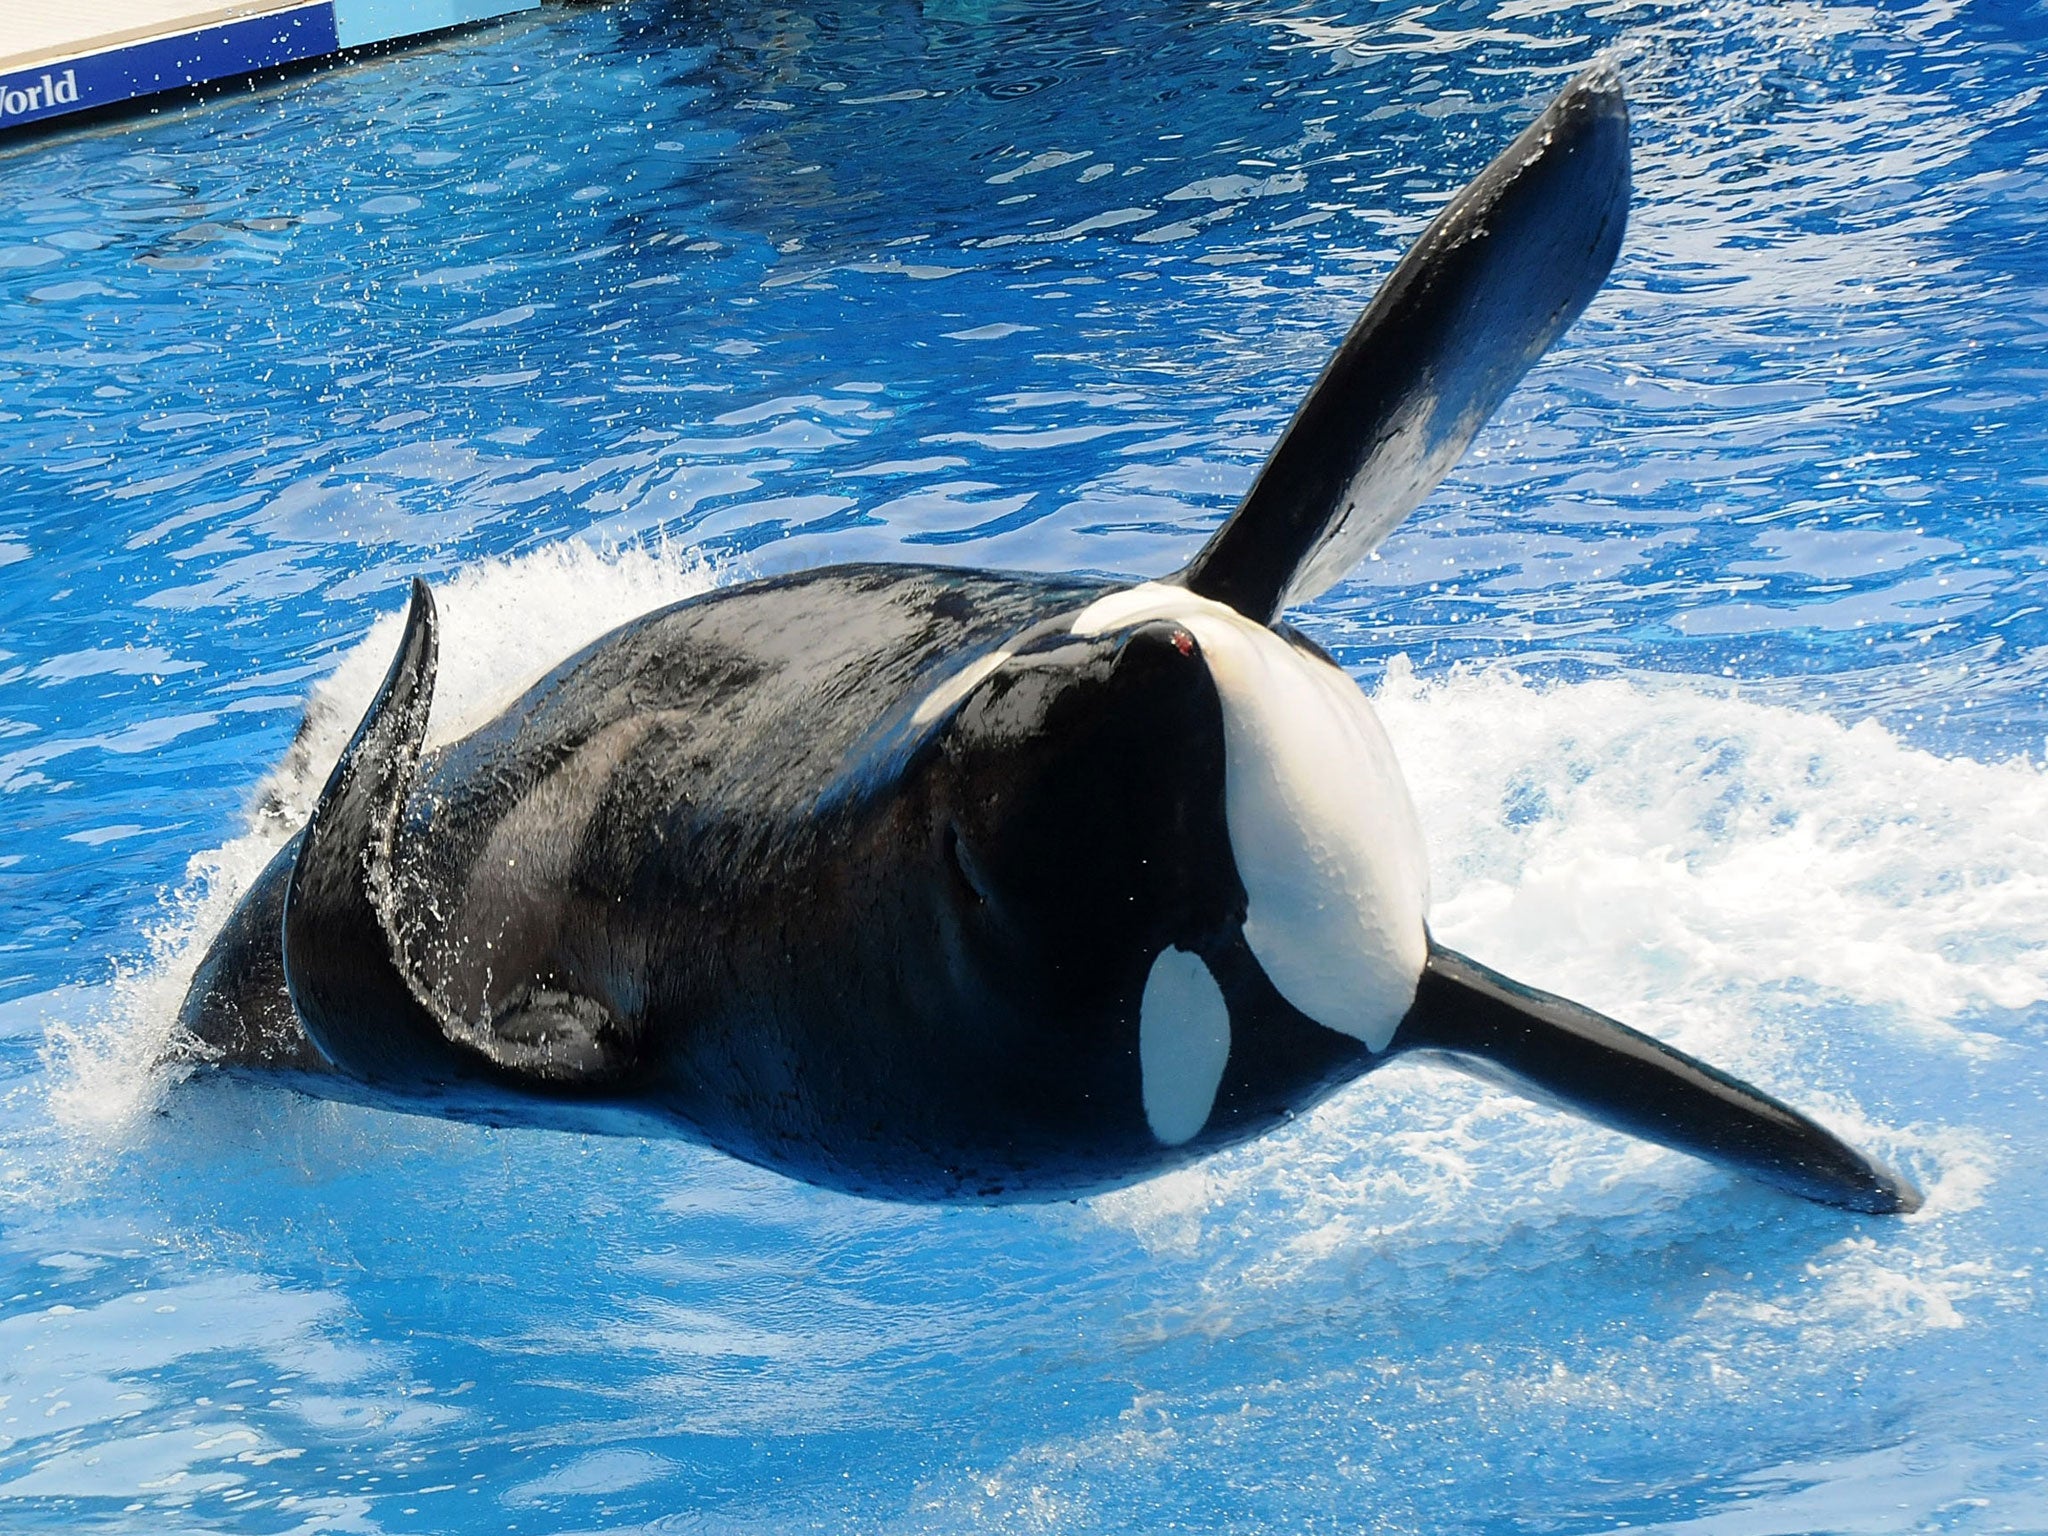 Killer whale 'Tilikum' appears during a performance at SeaWorld in Orlando, Florida. 'Tilikum' is back to public performance March 30, the first time since the six-ton whale has performed since killing trainer 40-year-old trainer Dawn Brancheau at the mar